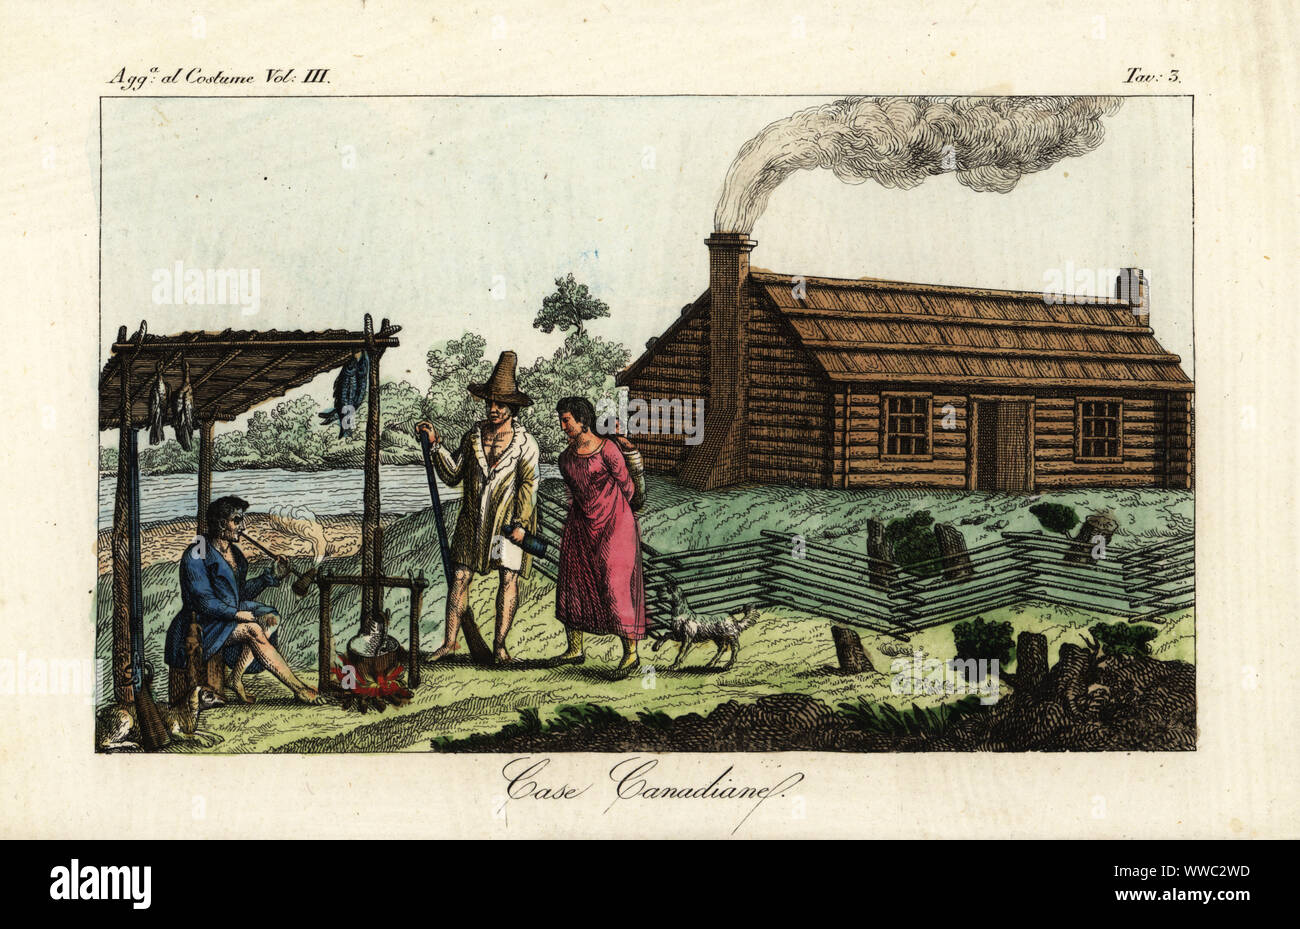 Structures of the Native Americans and Canadians. A Canadian loghouse at right and hut or Vig-Wam (wigwam) at left. Man smoking a pipe watching a pot on a fire, with fish and birds hanging above, musket at left. Couple with baby in papoose. Casa Canadiane. Handcoloured copperplate engraving after Giulio Ferrario in his Costumes Ancient and Modern of the Peoples of the World, Il Costume Antico e Moderno, Florence, 1837. Stock Photo